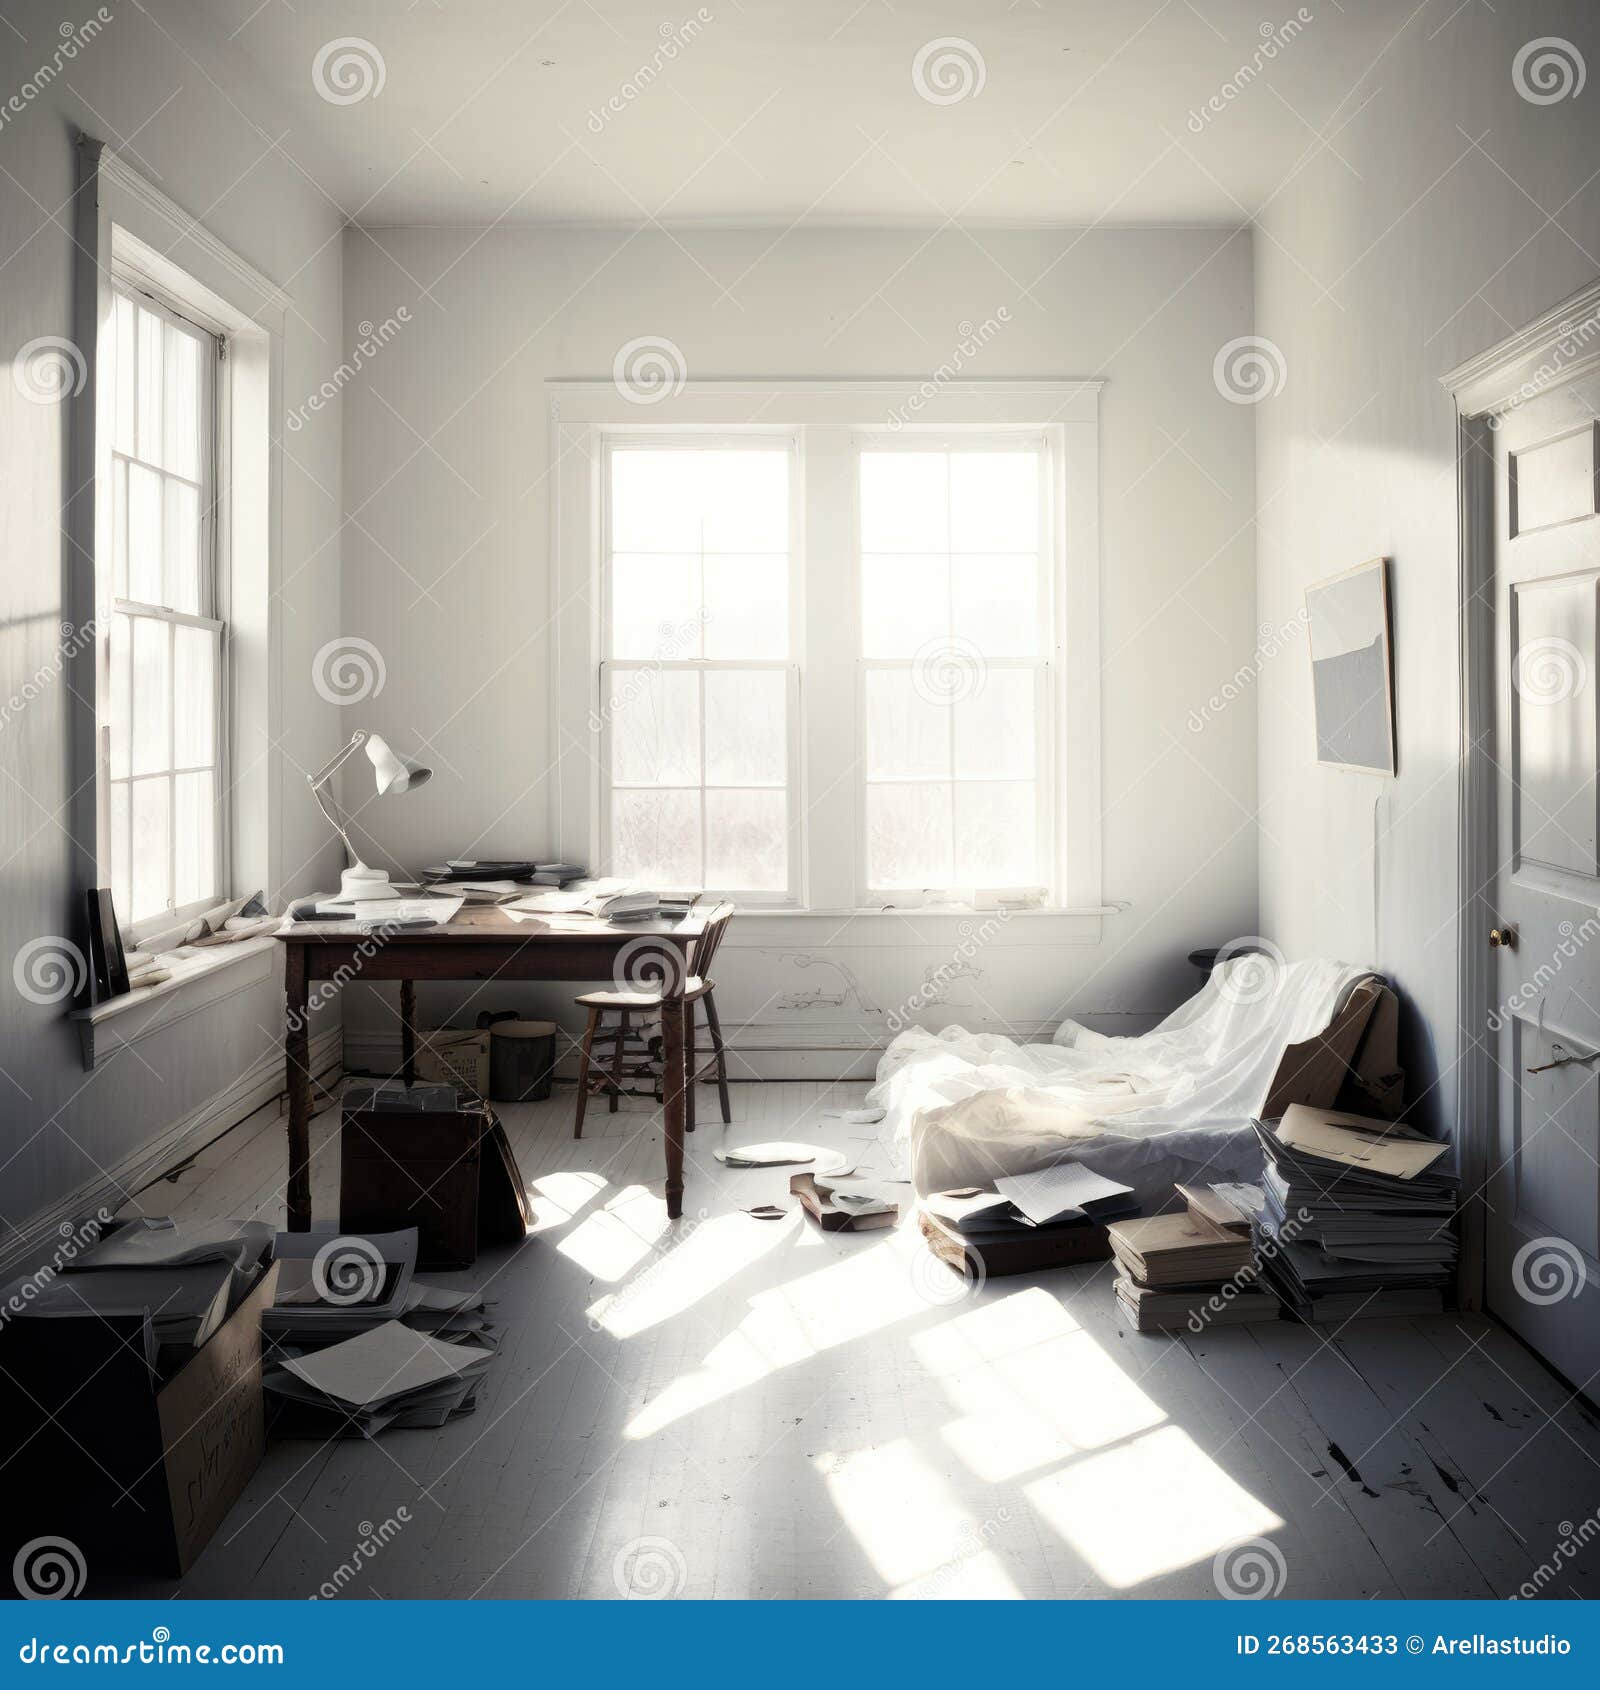 The Room is Very Bright, with a Window that Lets in a Lot of Light ...